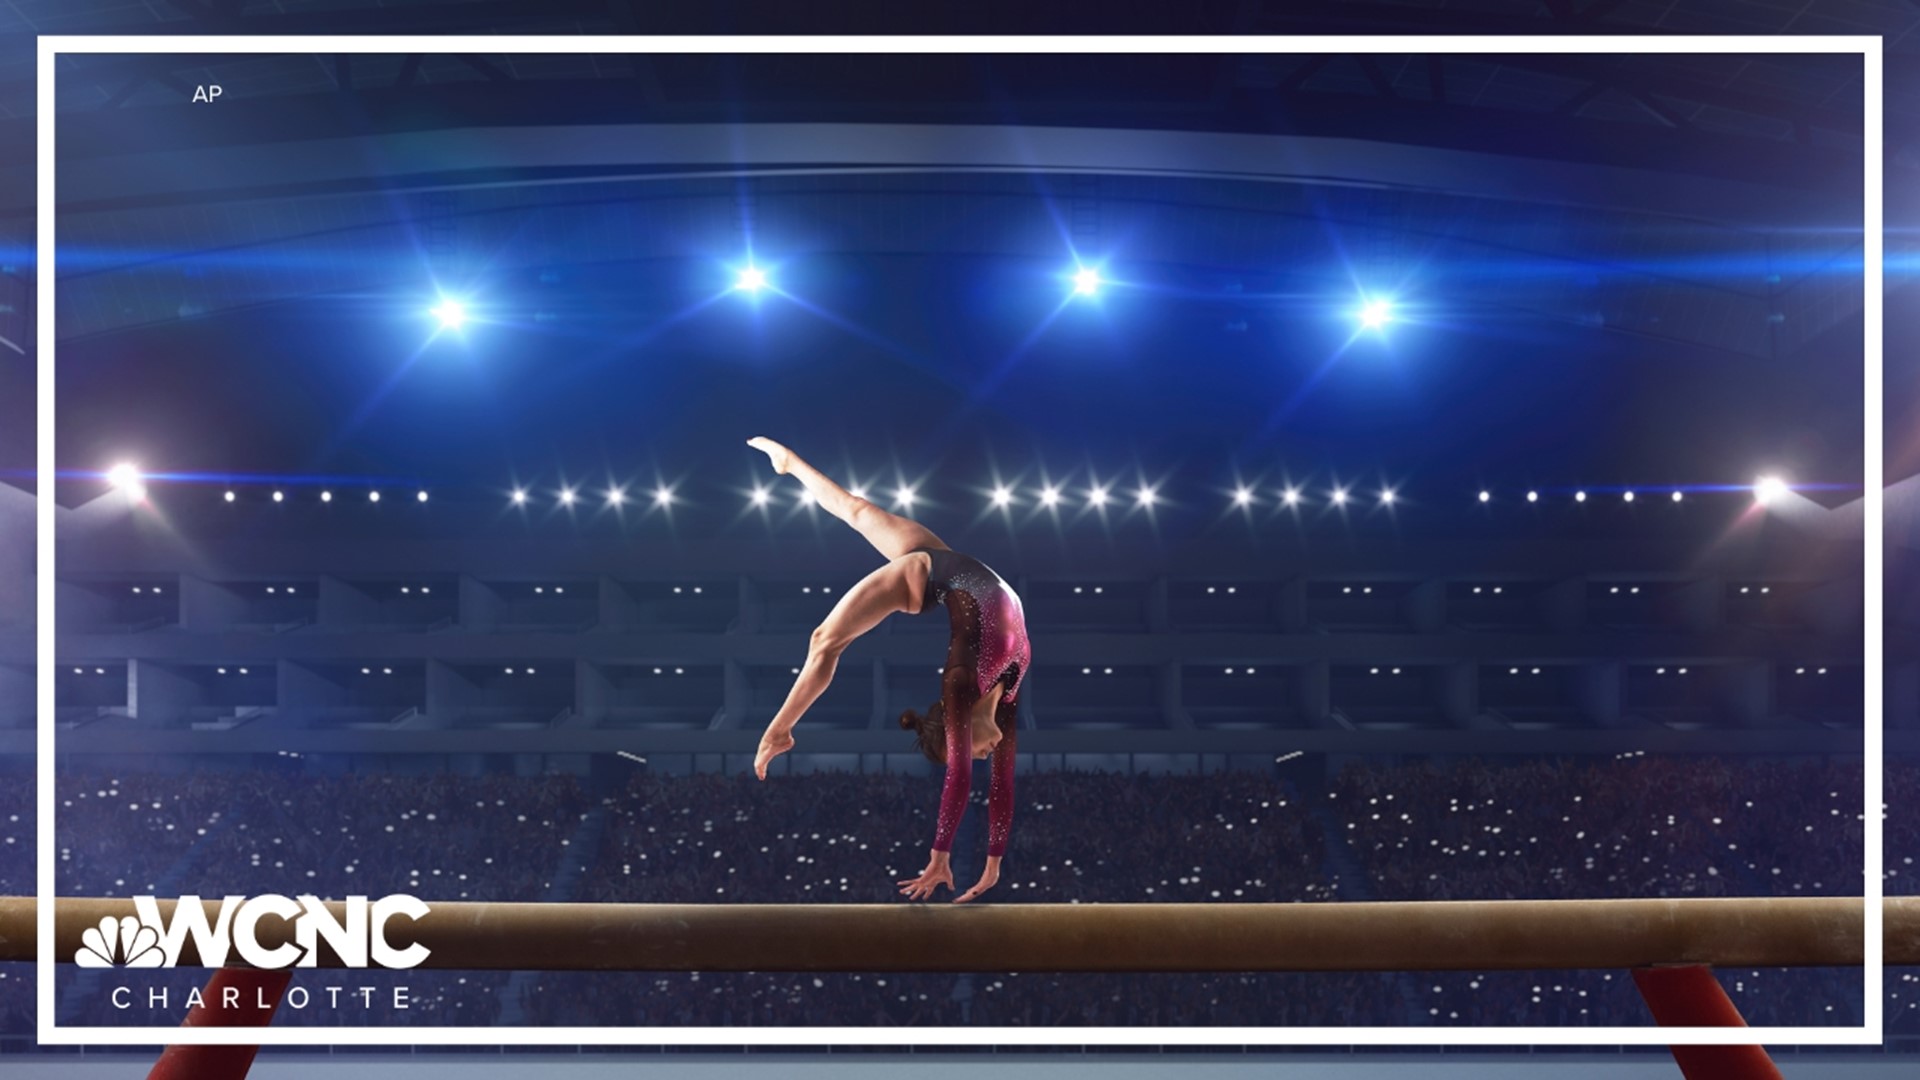 Artificial intelligence could soon play a part in judging for Olympic gymnastics. Let's connect the dots.